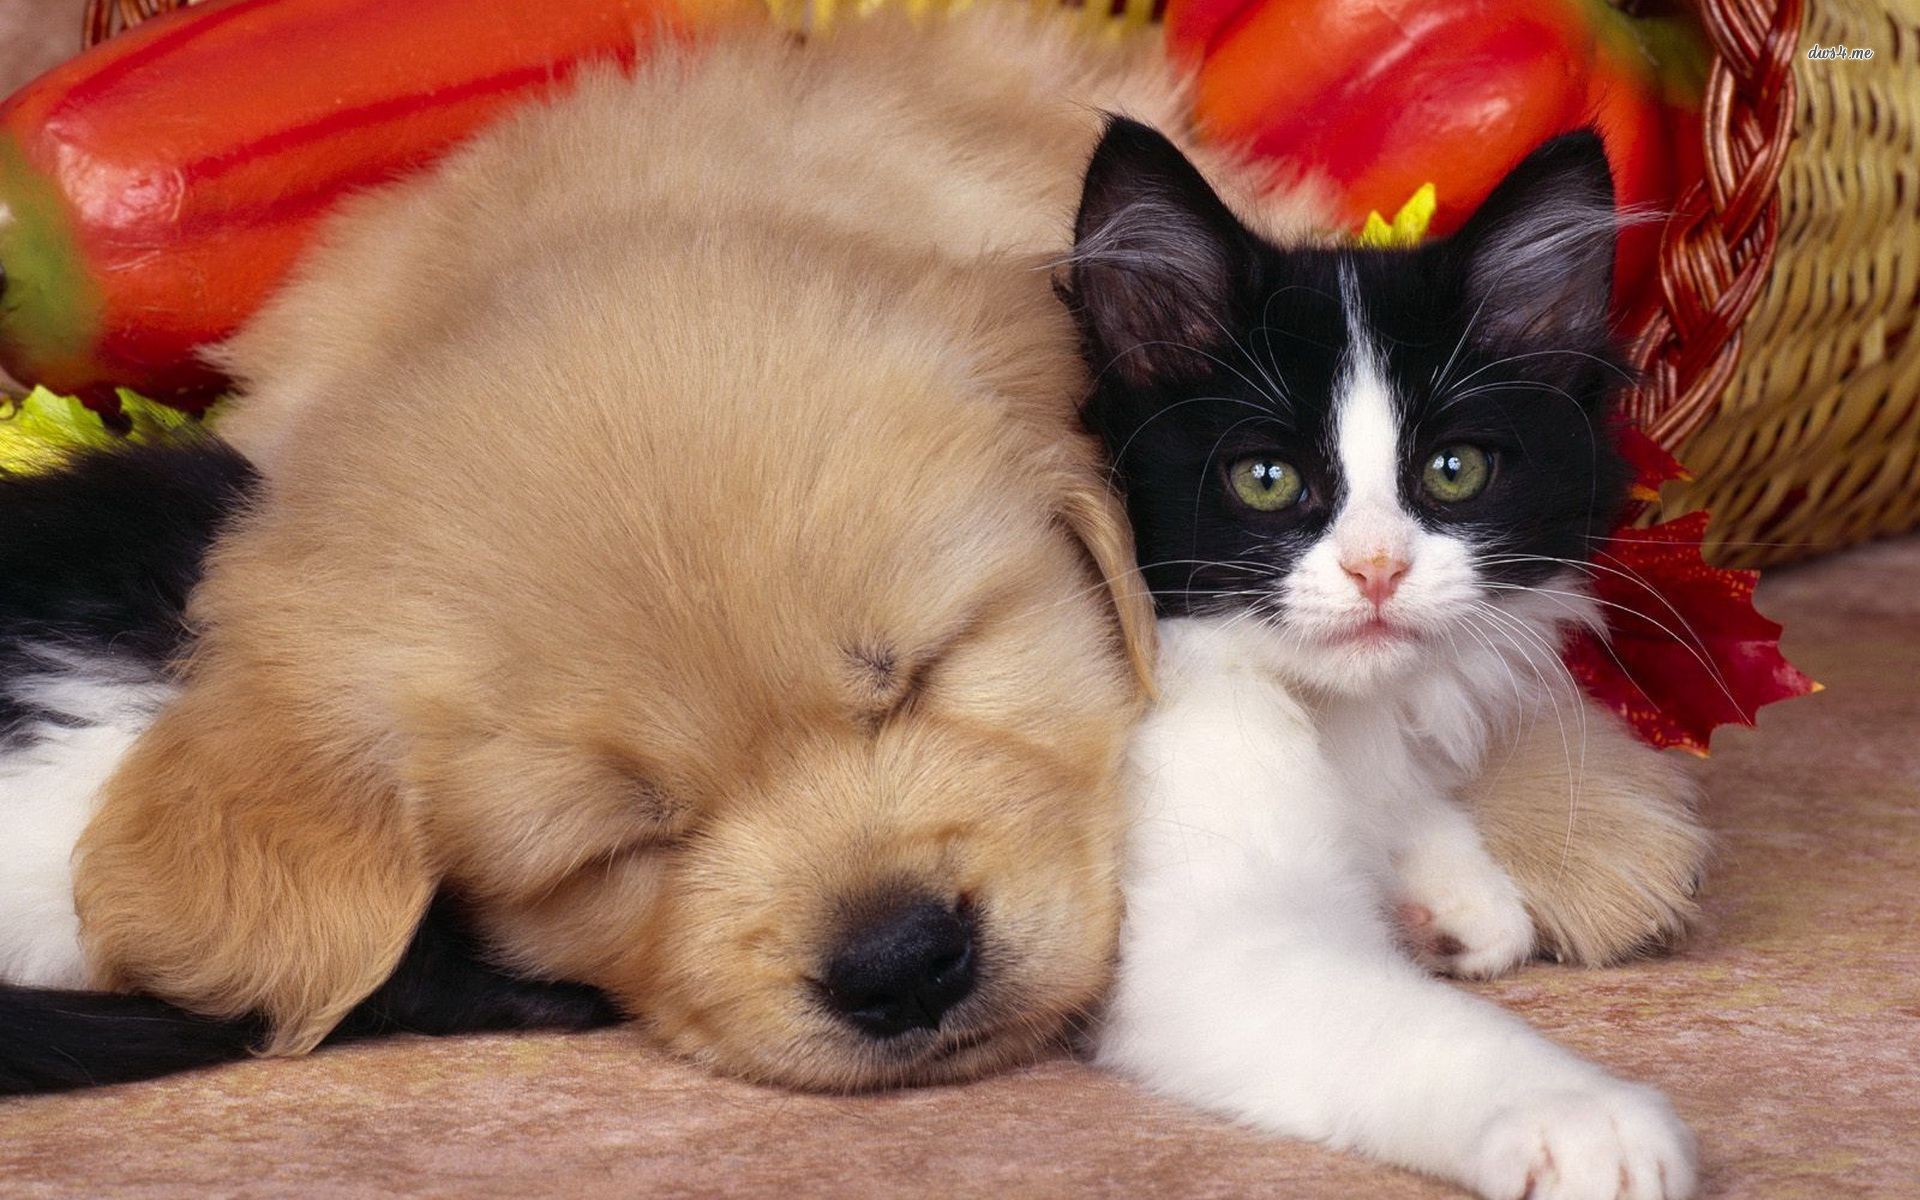 Cute Dog And Cat Hd Wallpaperjpg. Dogs And Cats Wallpaper